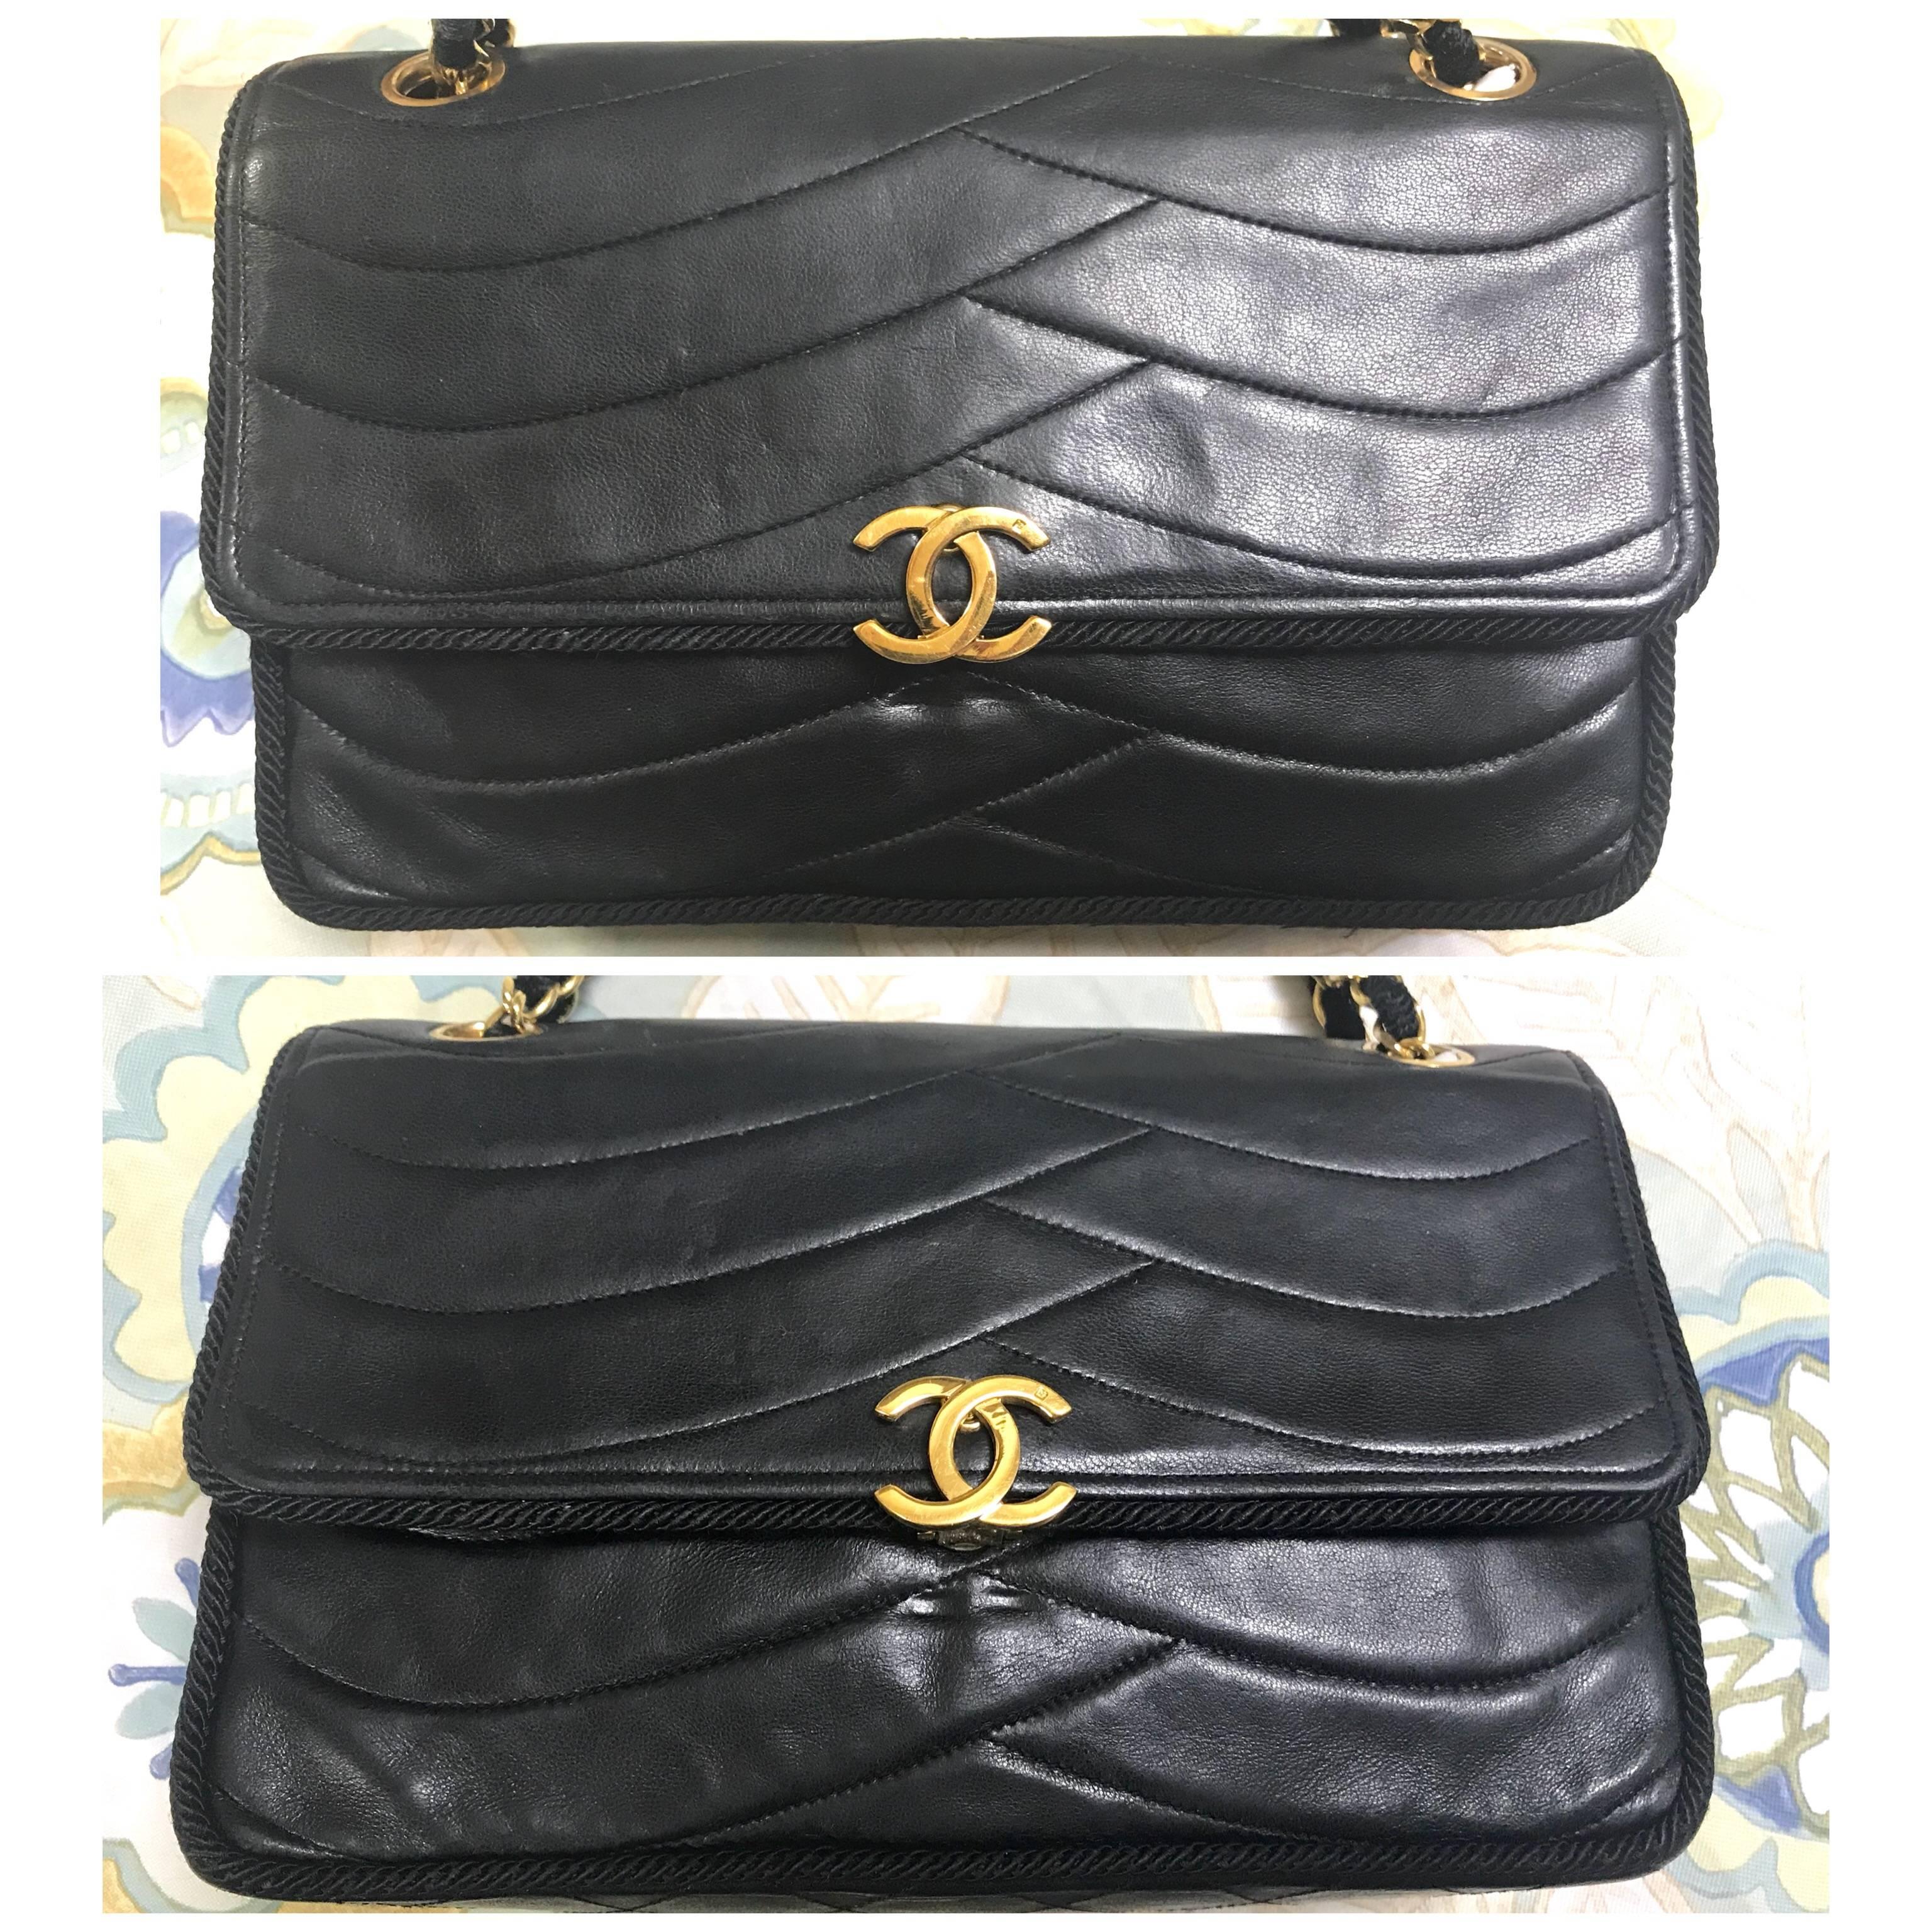 1980's vintage Chanel black 2.55 shoulder bag with wavy stitches and rope strings and gold chain strap. Very rare piece from the era.

This is a very rare vintage CHANEL black lambskin 2.55 bag with the rope strap in the 80's.

                     